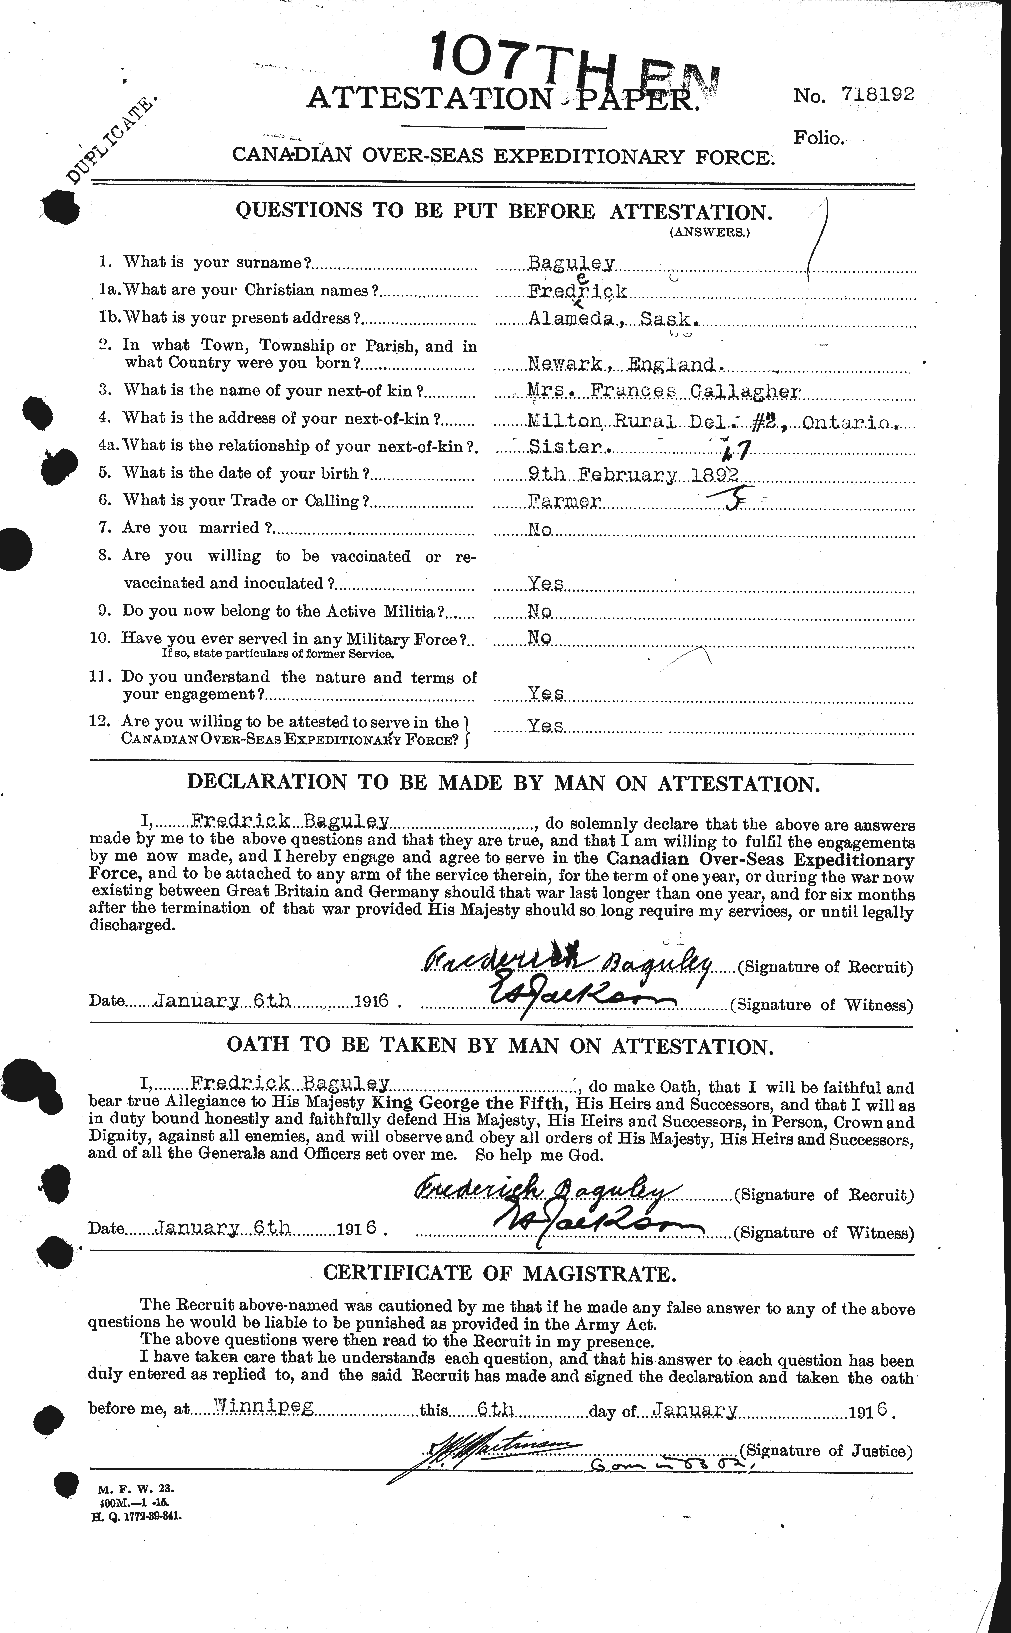 Personnel Records of the First World War - CEF 218495a